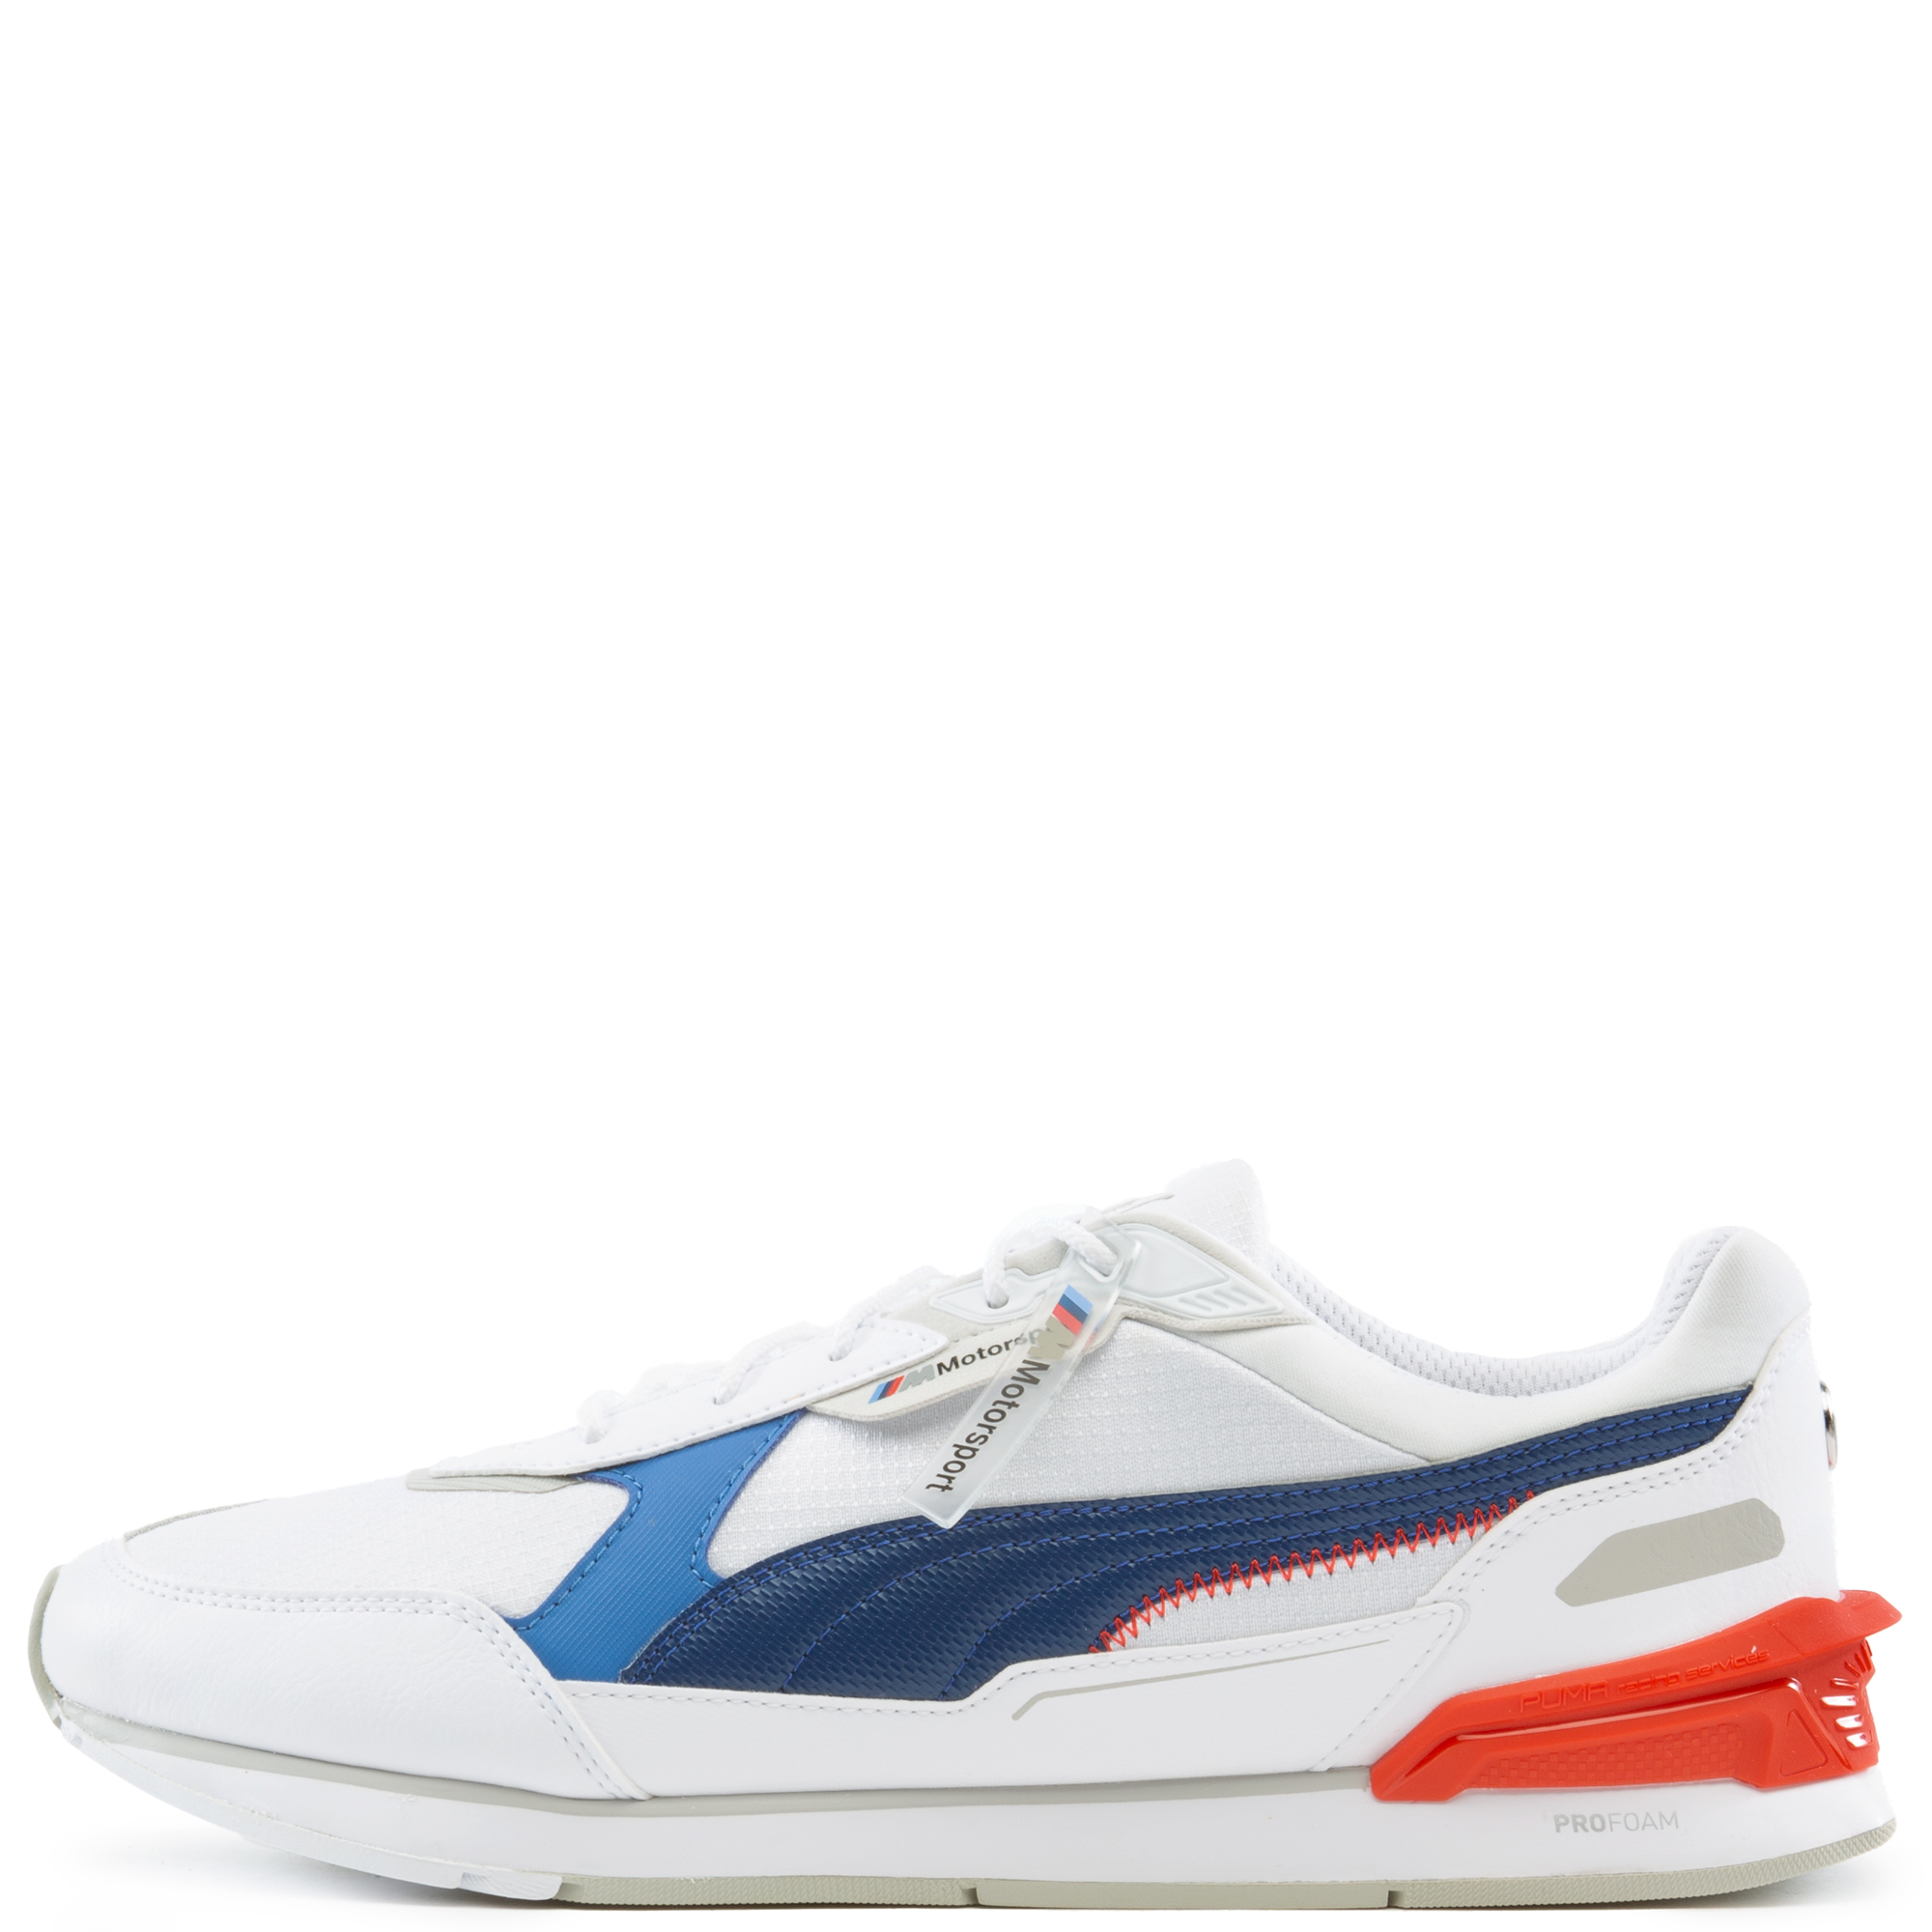 $99.99 - BMW MMS Low Racer White/Estate/Blue/Fiery Red